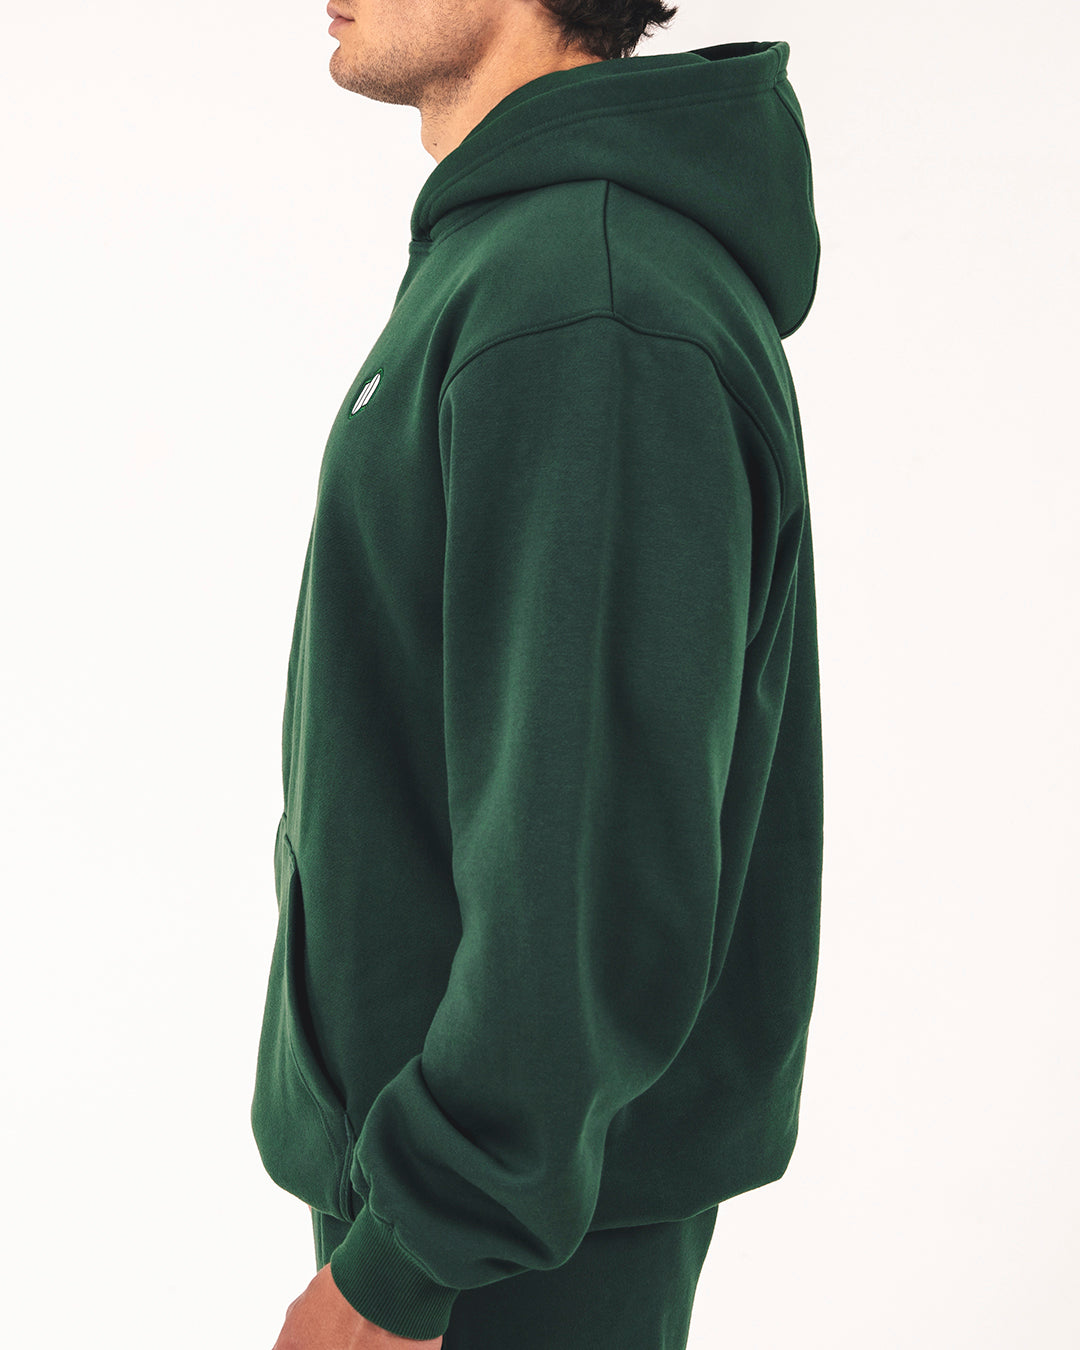 PFC: 002-2 - Men's Hoodie - Forest Green